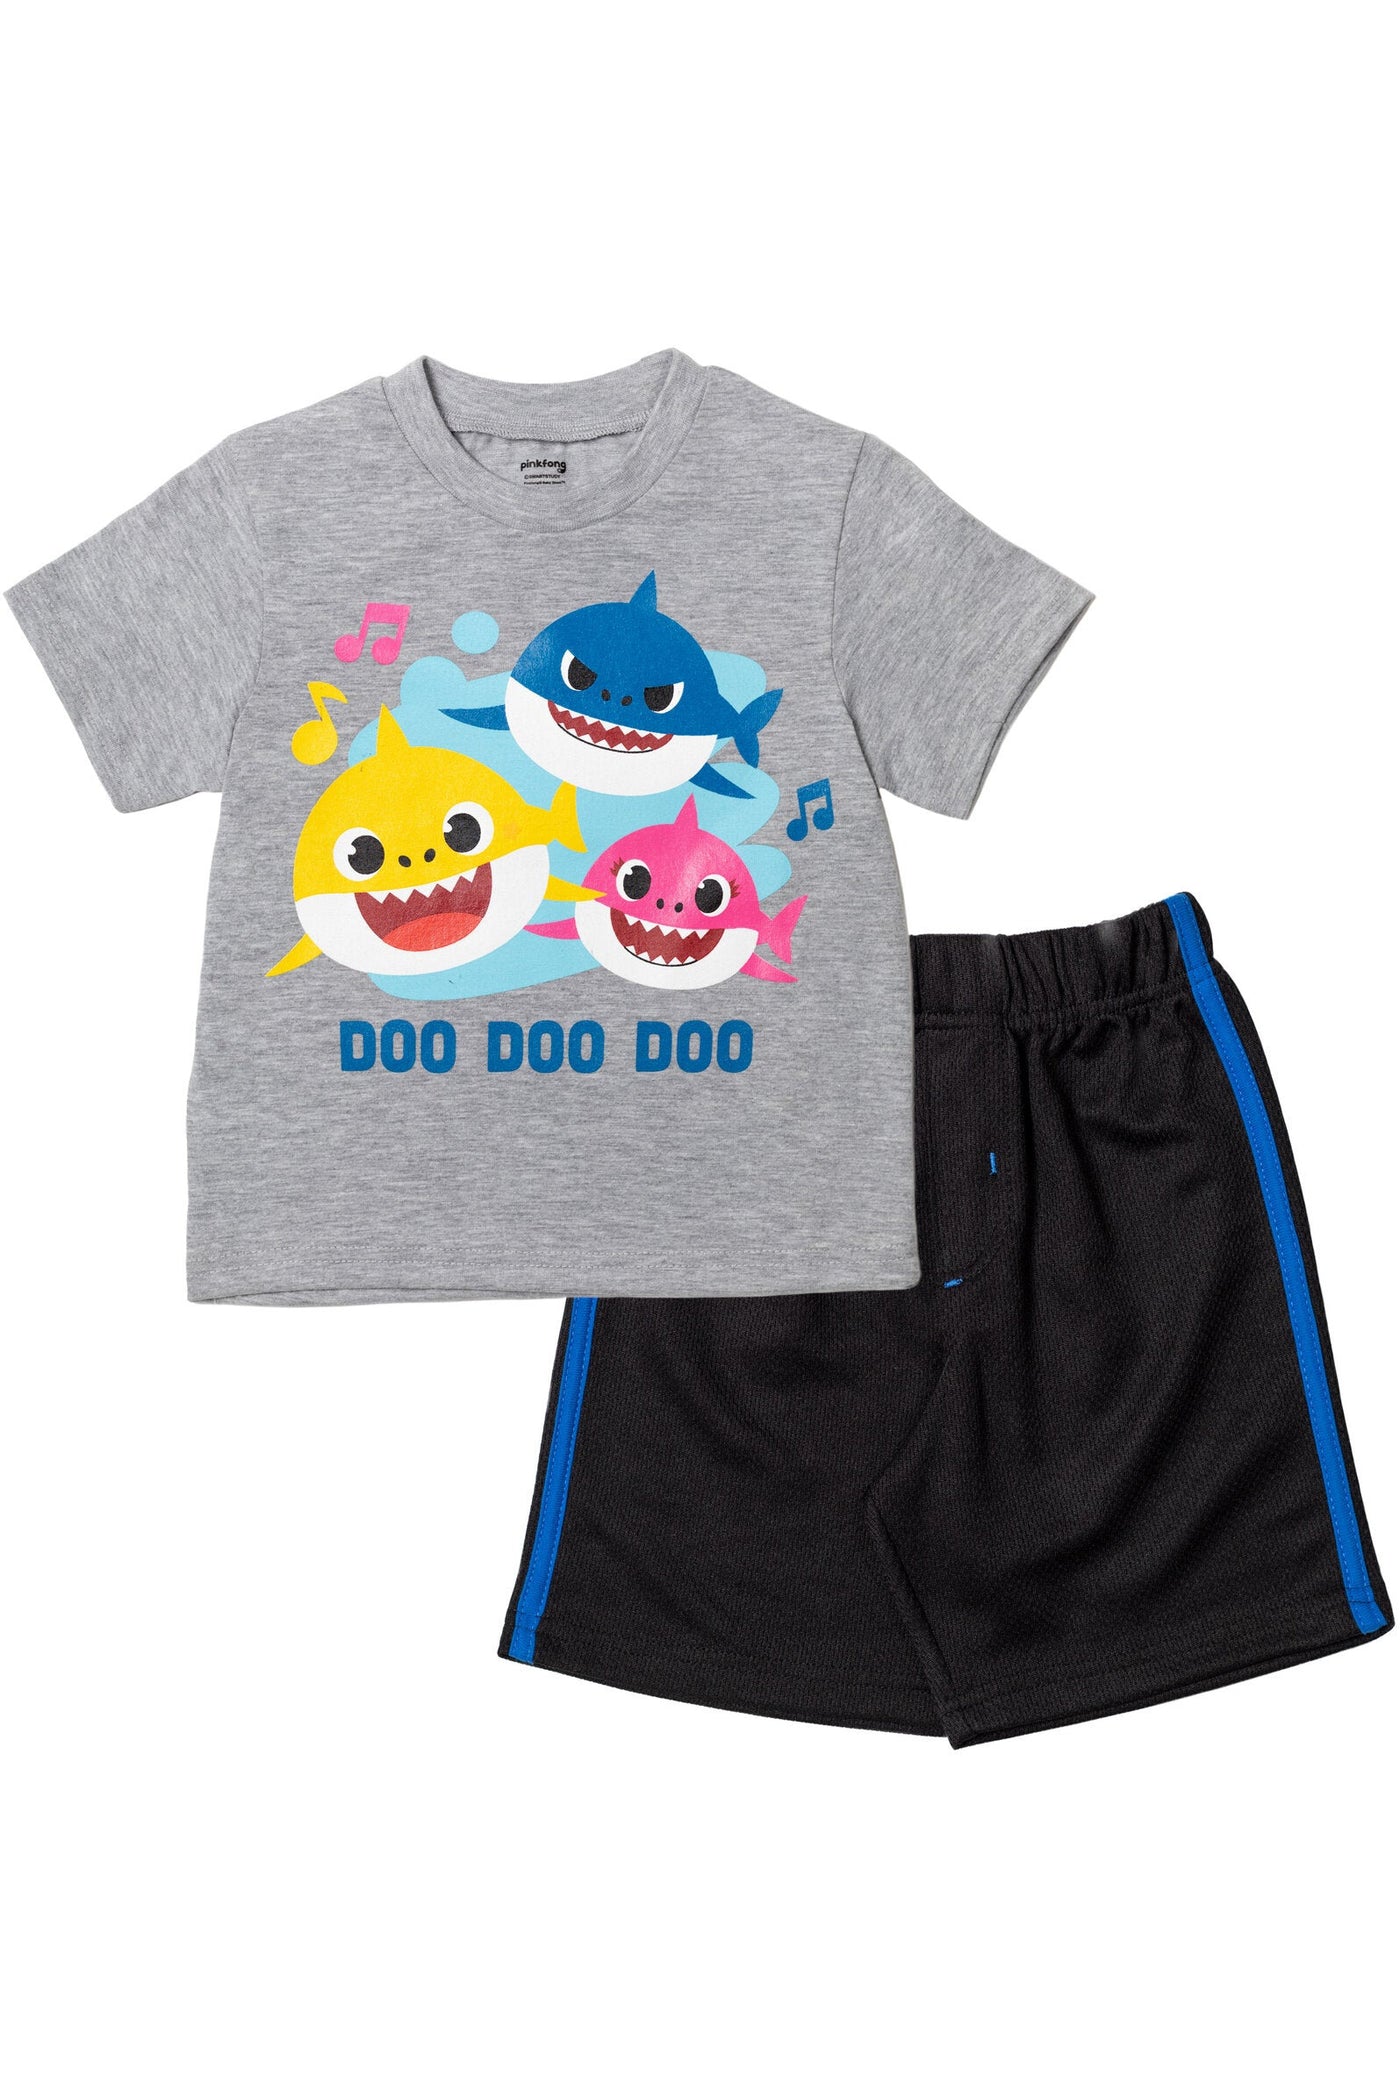 Pinkfong Baby Shark Daddy Shark Mommy Shark T-Shirt and Mesh Shorts Outfit Set Toddler